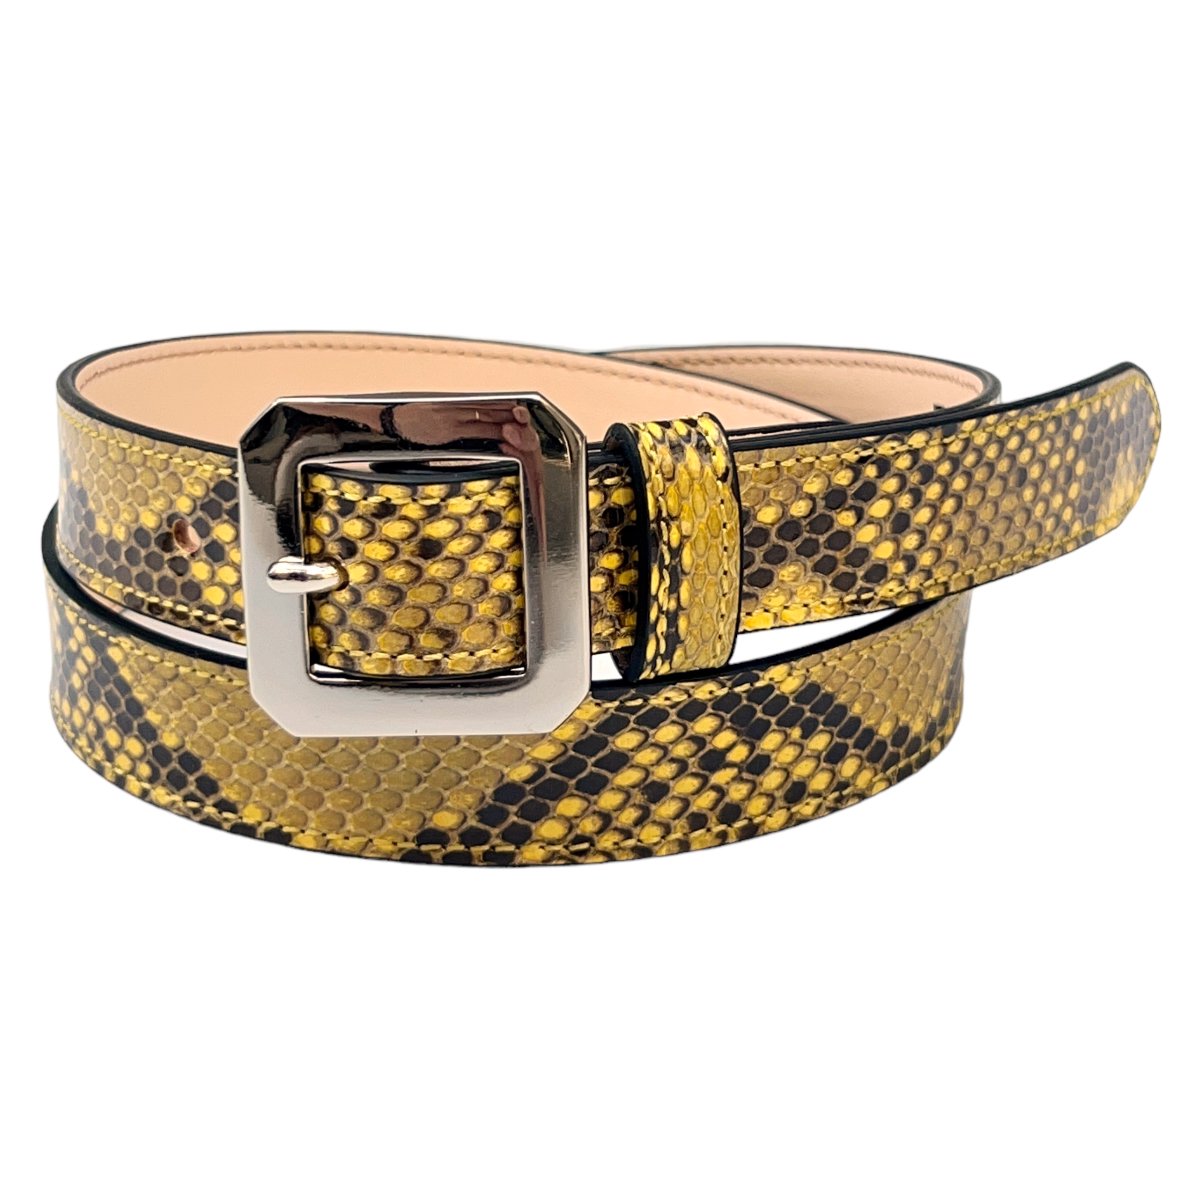 FIRSTRUST<BR>TRIBE / PYTHON LEATHER BELT | STAY GOLD